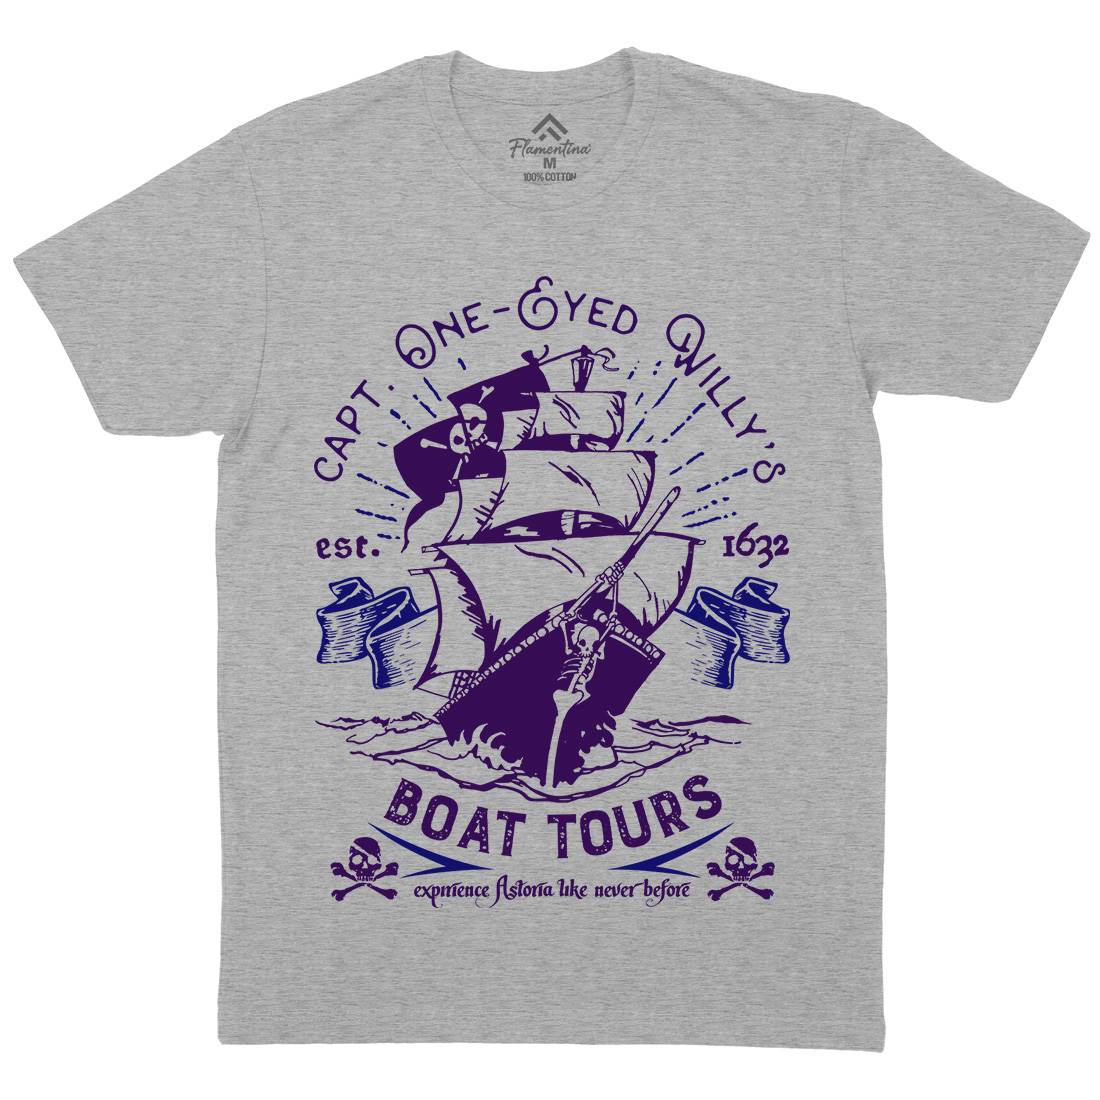 One-Eyed Willys Boat Tours Mens Organic Crew Neck T-Shirt Horror D160